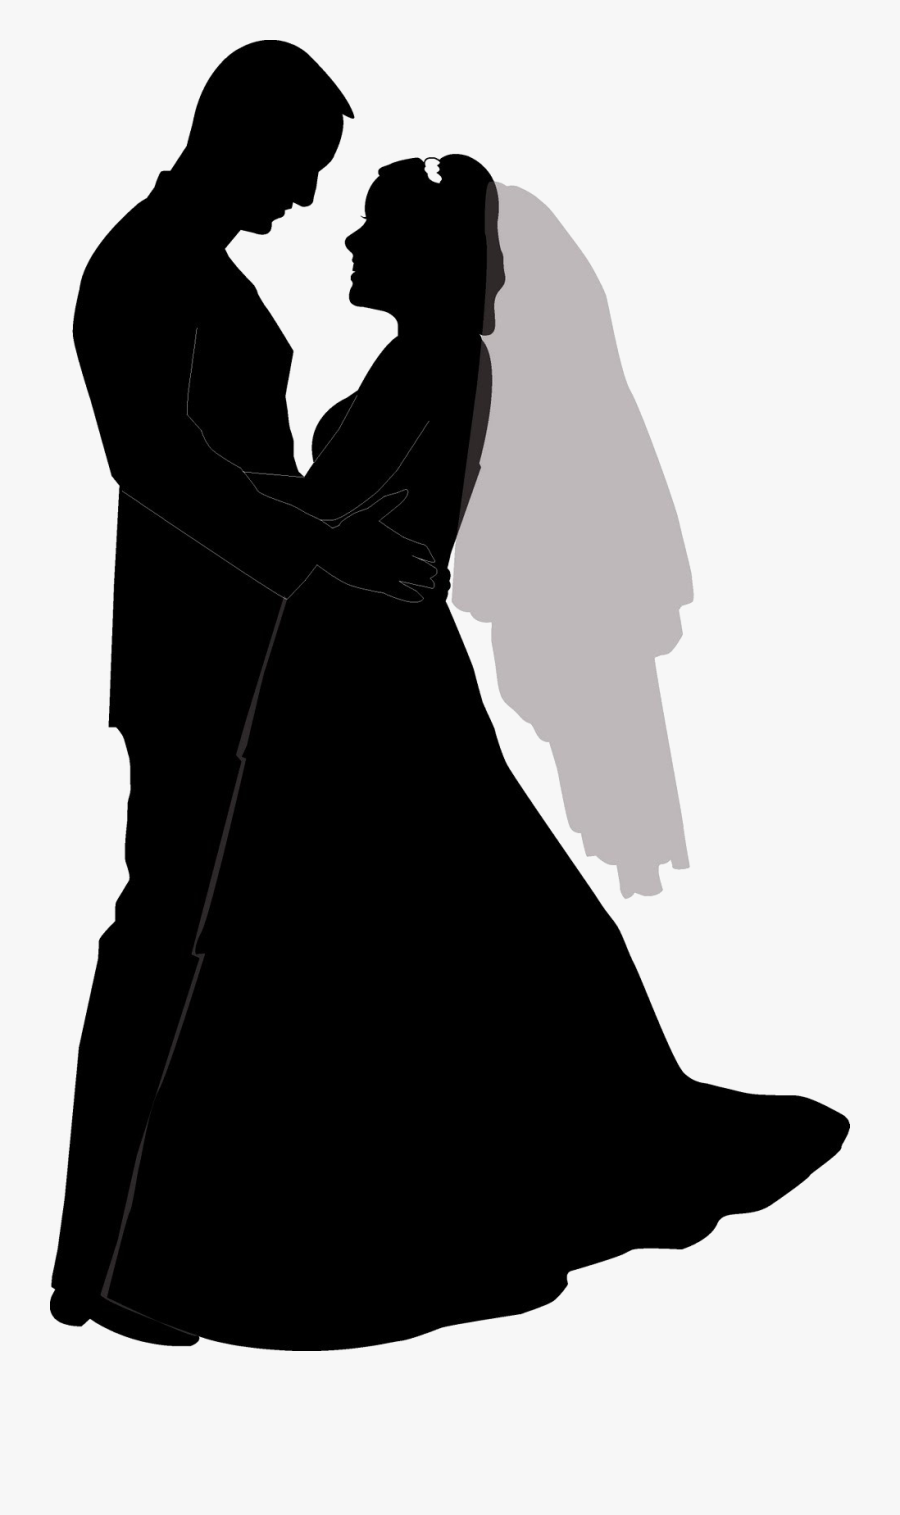 Transparent Rifle Silhouette Png - Wedding Couple Silhouette Png, Transparent Clipart